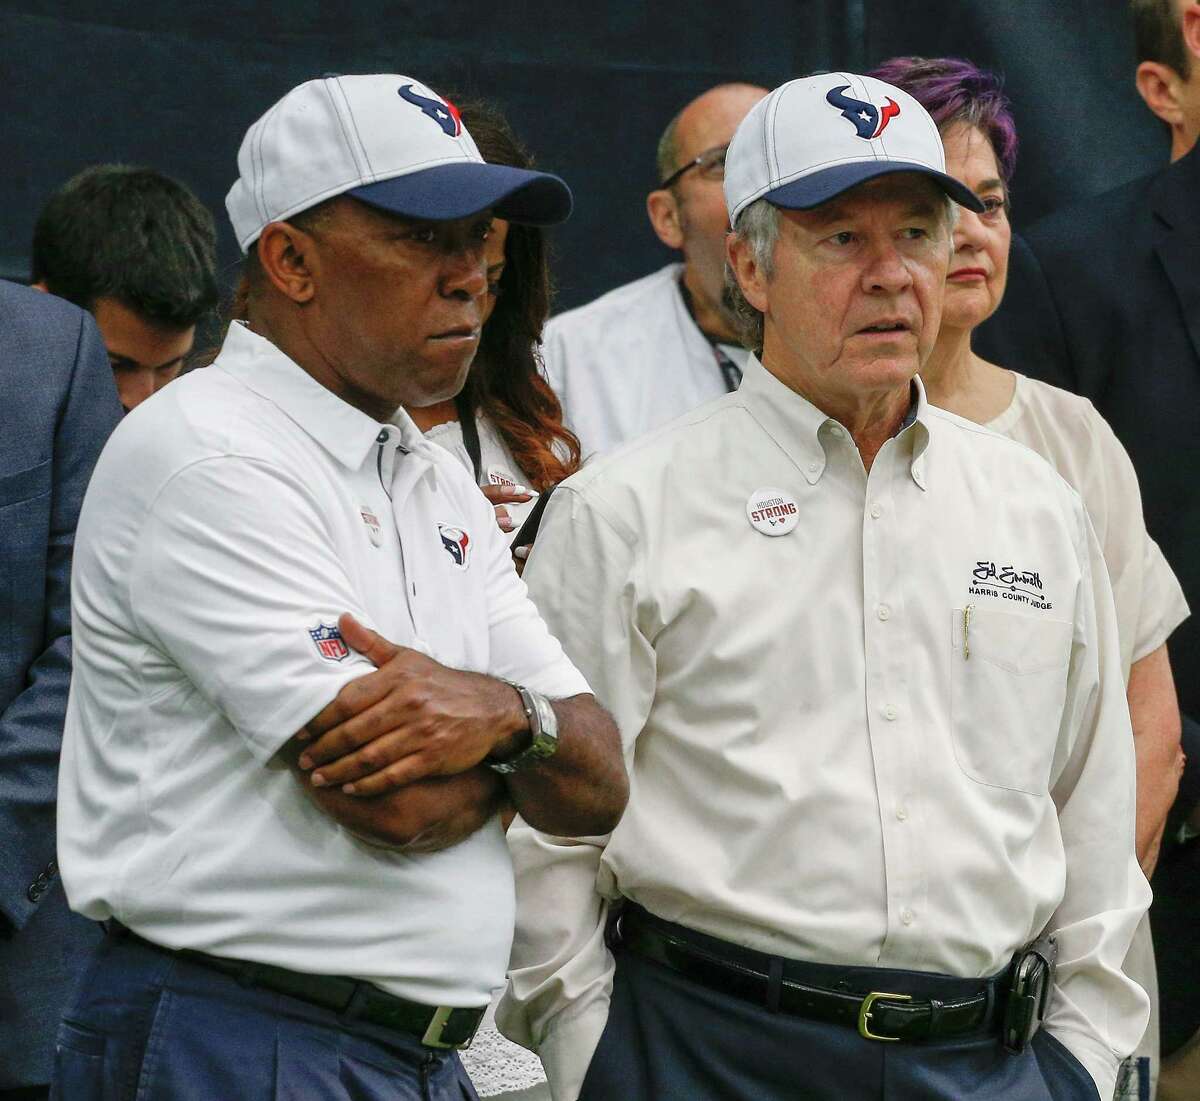 Houston Mayor Sylvester Turner, left, and Harris County Judge Ed Emmett watch from the sidelines before the Houston Texans played the Jacksonville Jaguars at NRG Stadium on Sept. 10. (Photo by Bob Levey/Getty Images)